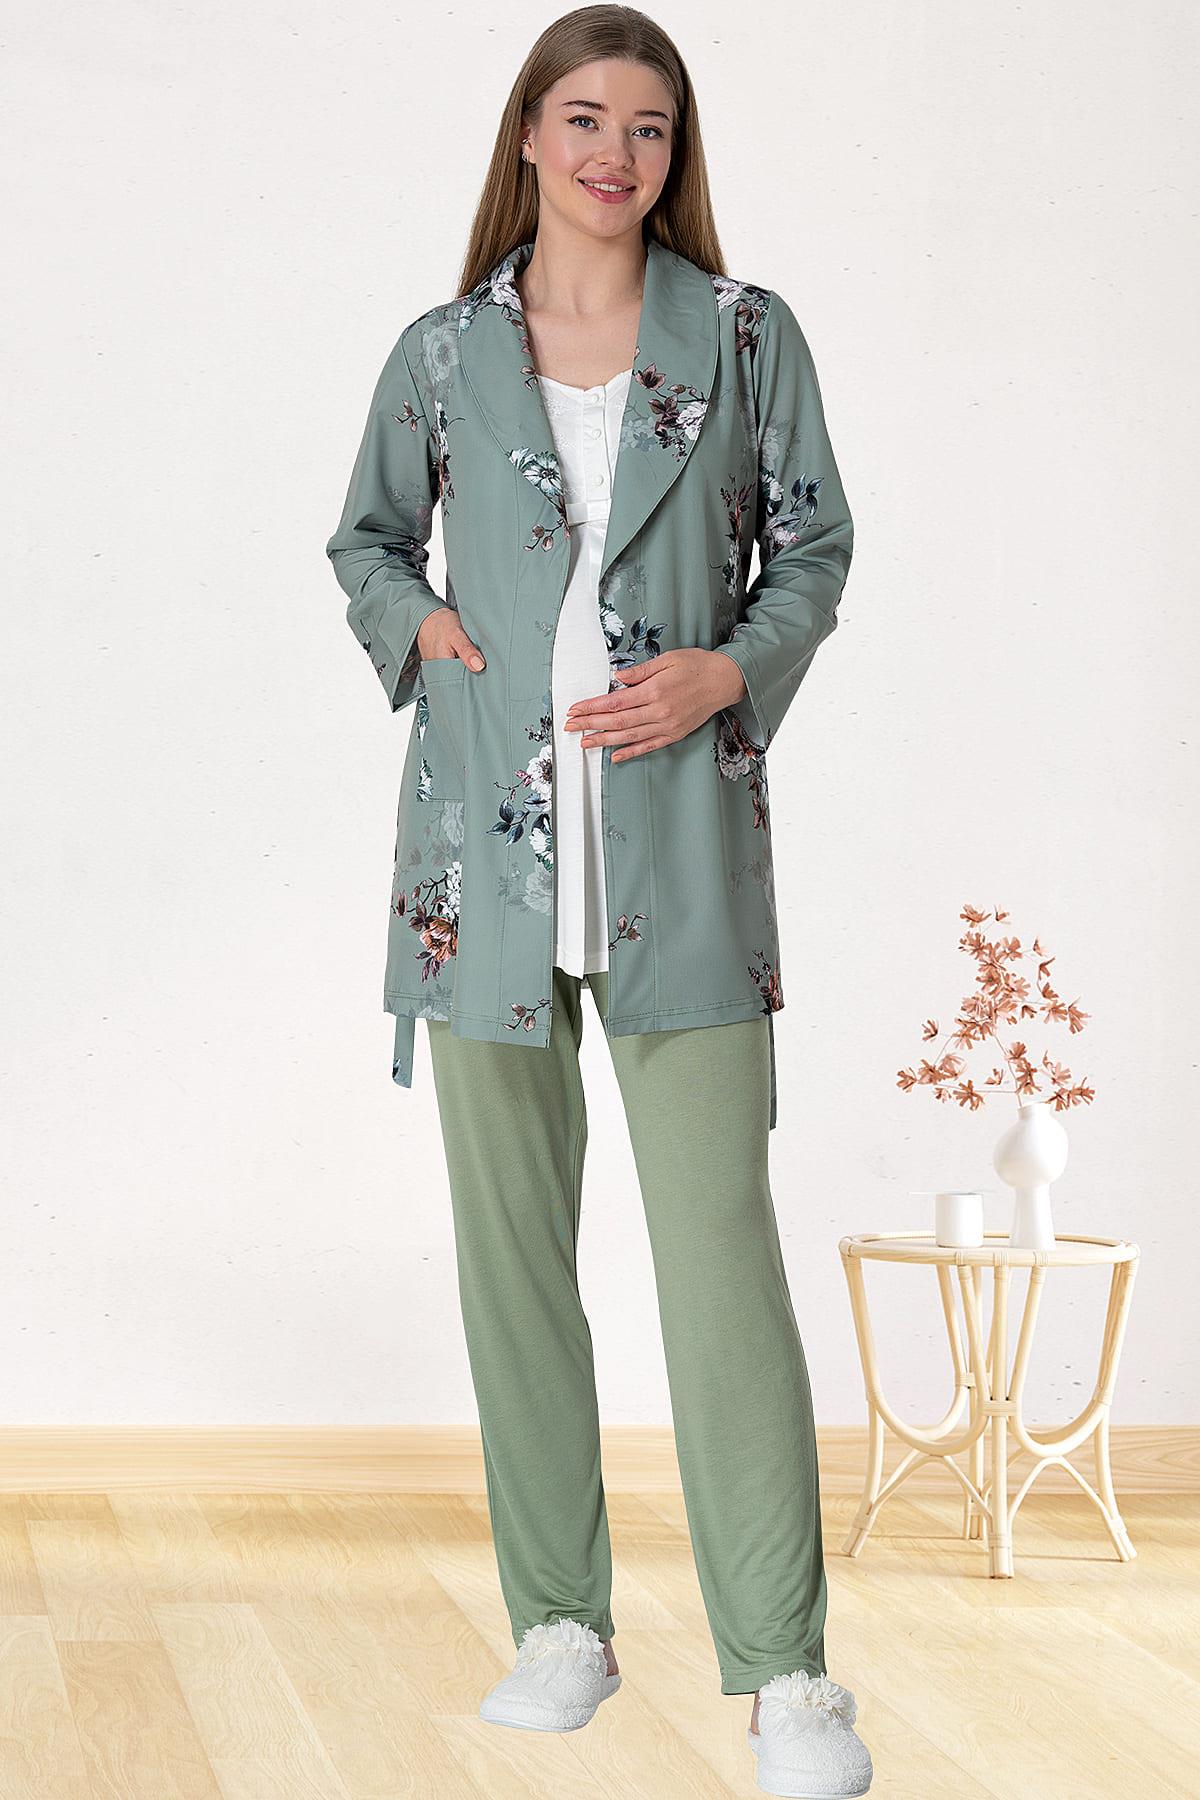 Shopymommy 5804 Guipure 3-Pieces Maternity & Nursing Pajamas With Pattern Robe Green